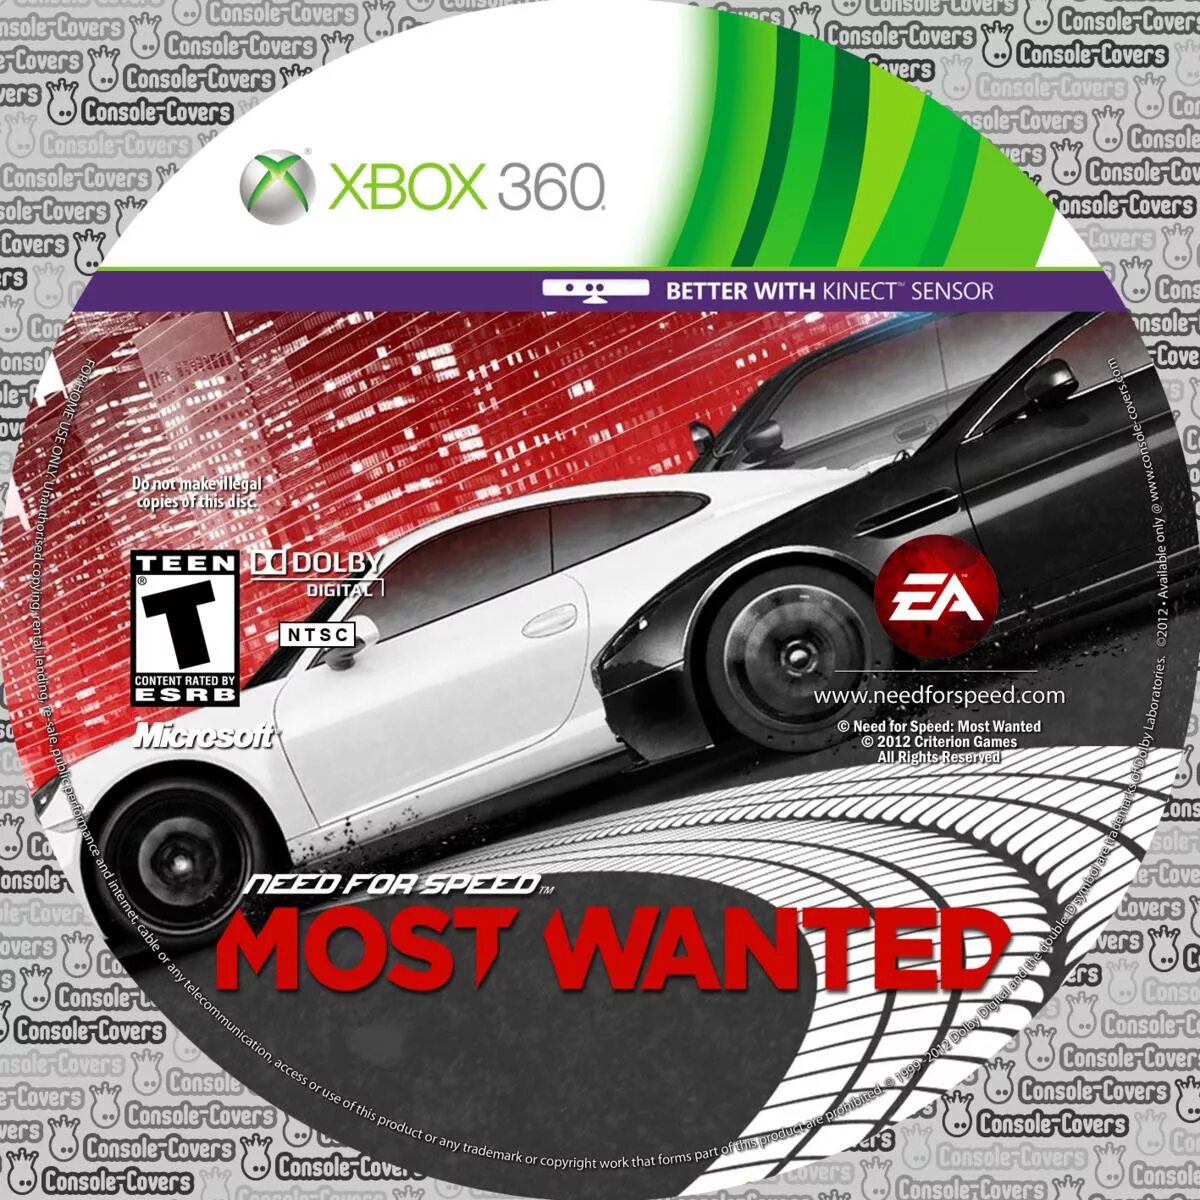 NFS most wanted диск Xbox 360. Most wanted Xbox 360 обложка. Need for Speed most wanted 2012 диск. NFS most wanted 2012 Xbox 360. Nfs most wanted xbox